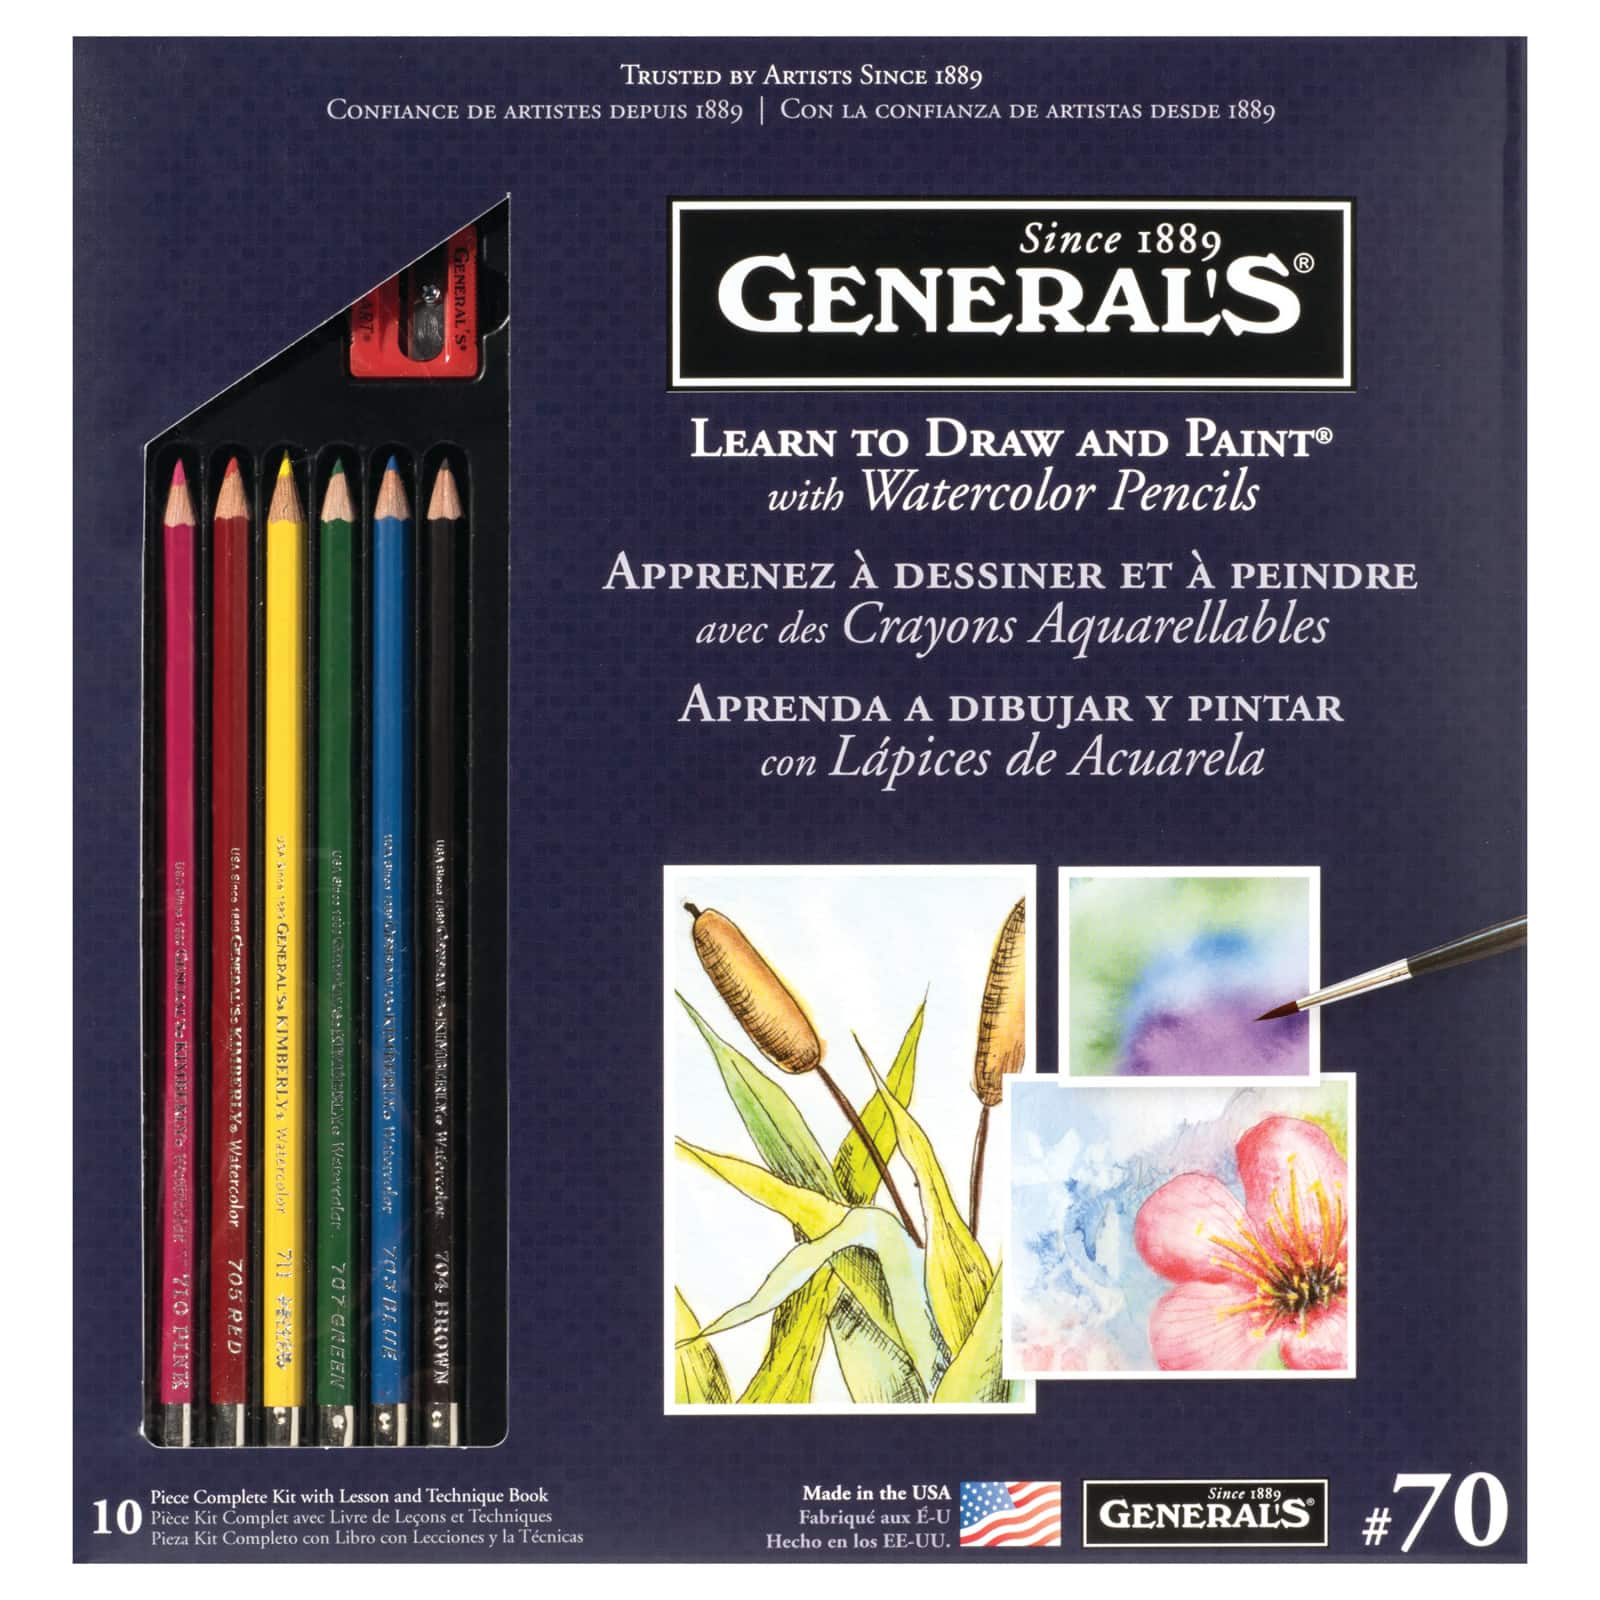 General's® No. 70 Learn to Draw and Paint® with Watercolor Pencils